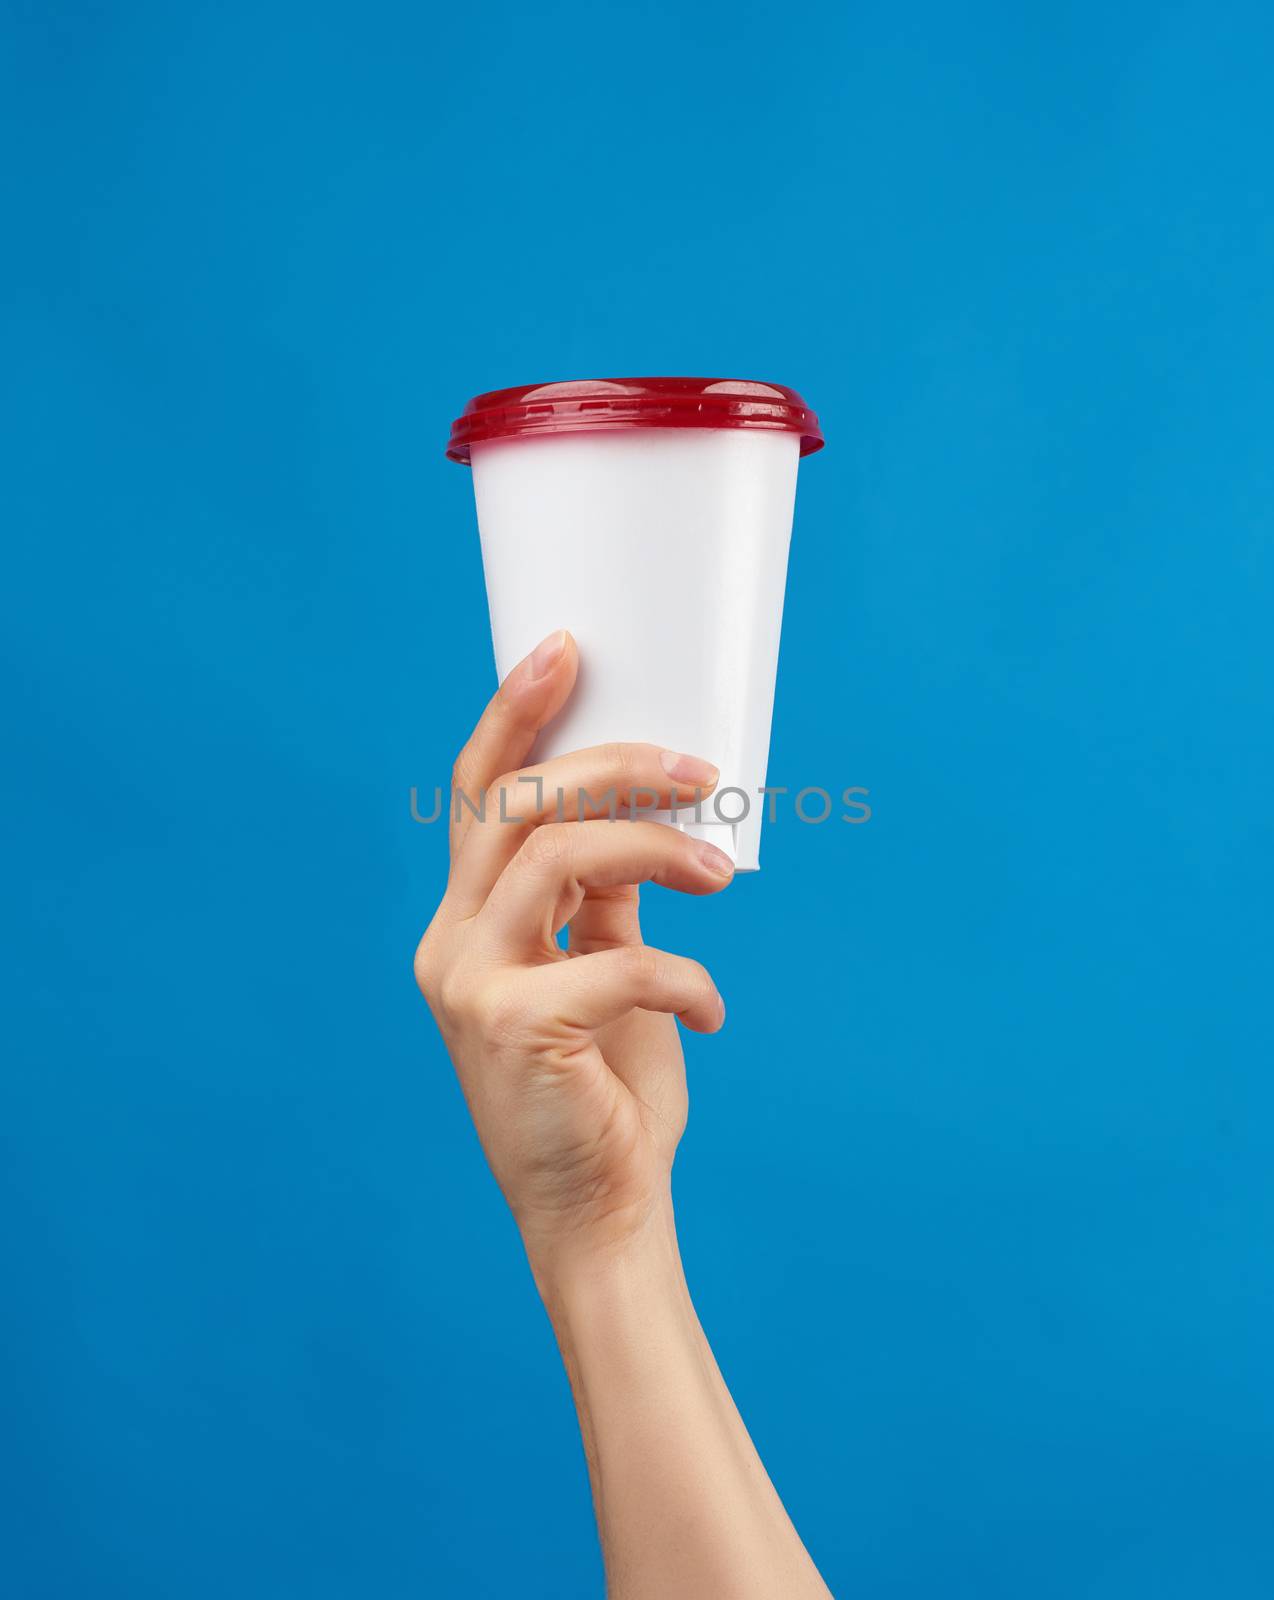 female hand holds a disposable white glass with a red cap on a blue background, take-away drinks